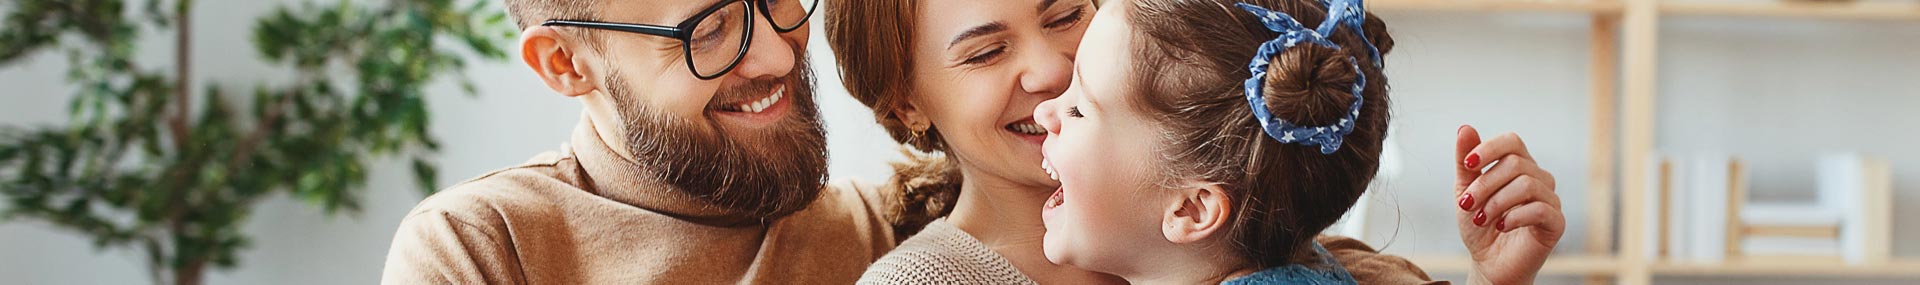 Father, mother and daughter laughing symbolizing a time of life when learning about life insurance is important.